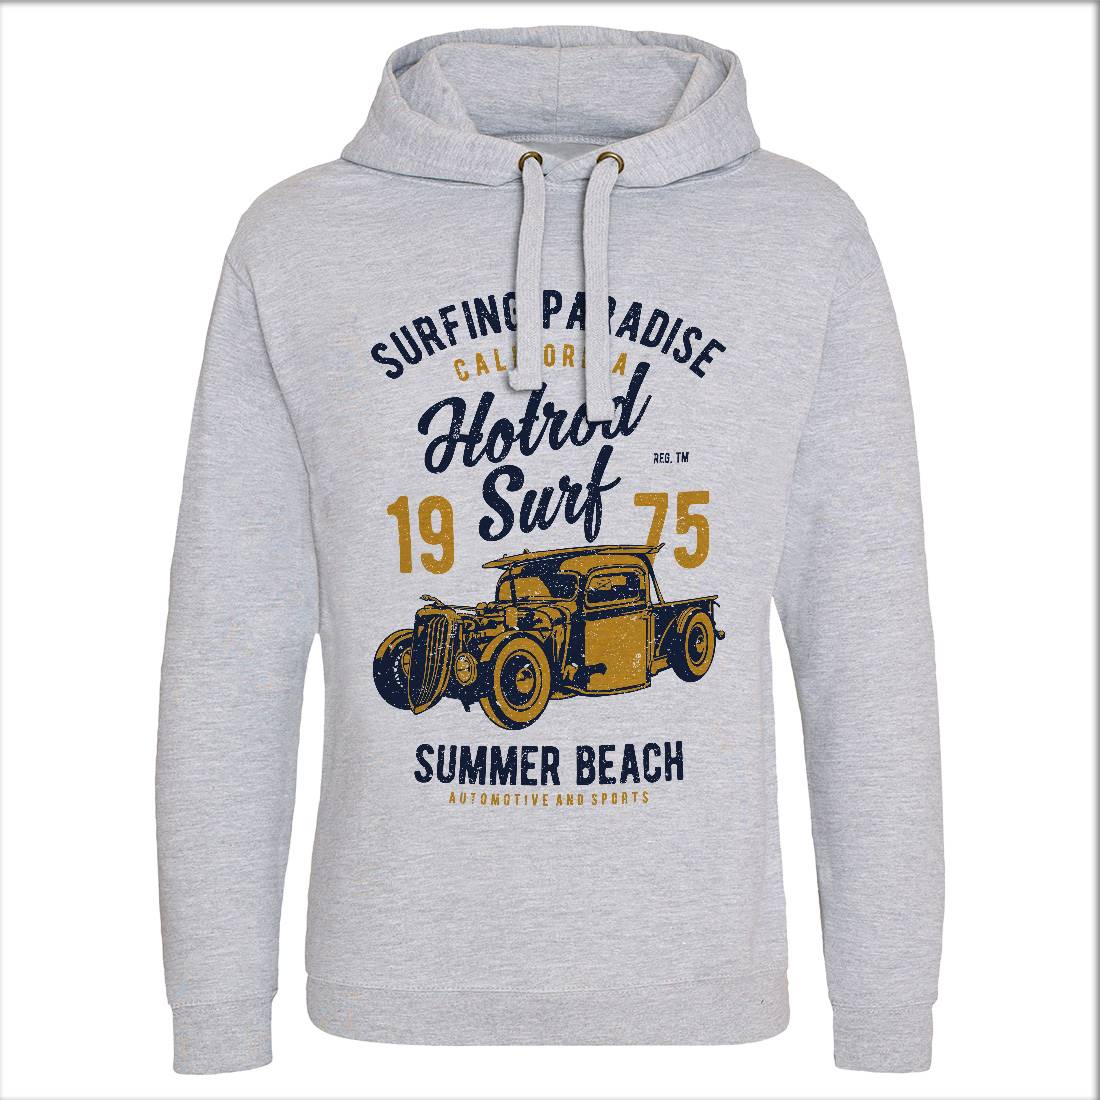 Hotrod Mens Hoodie Without Pocket Surf A688